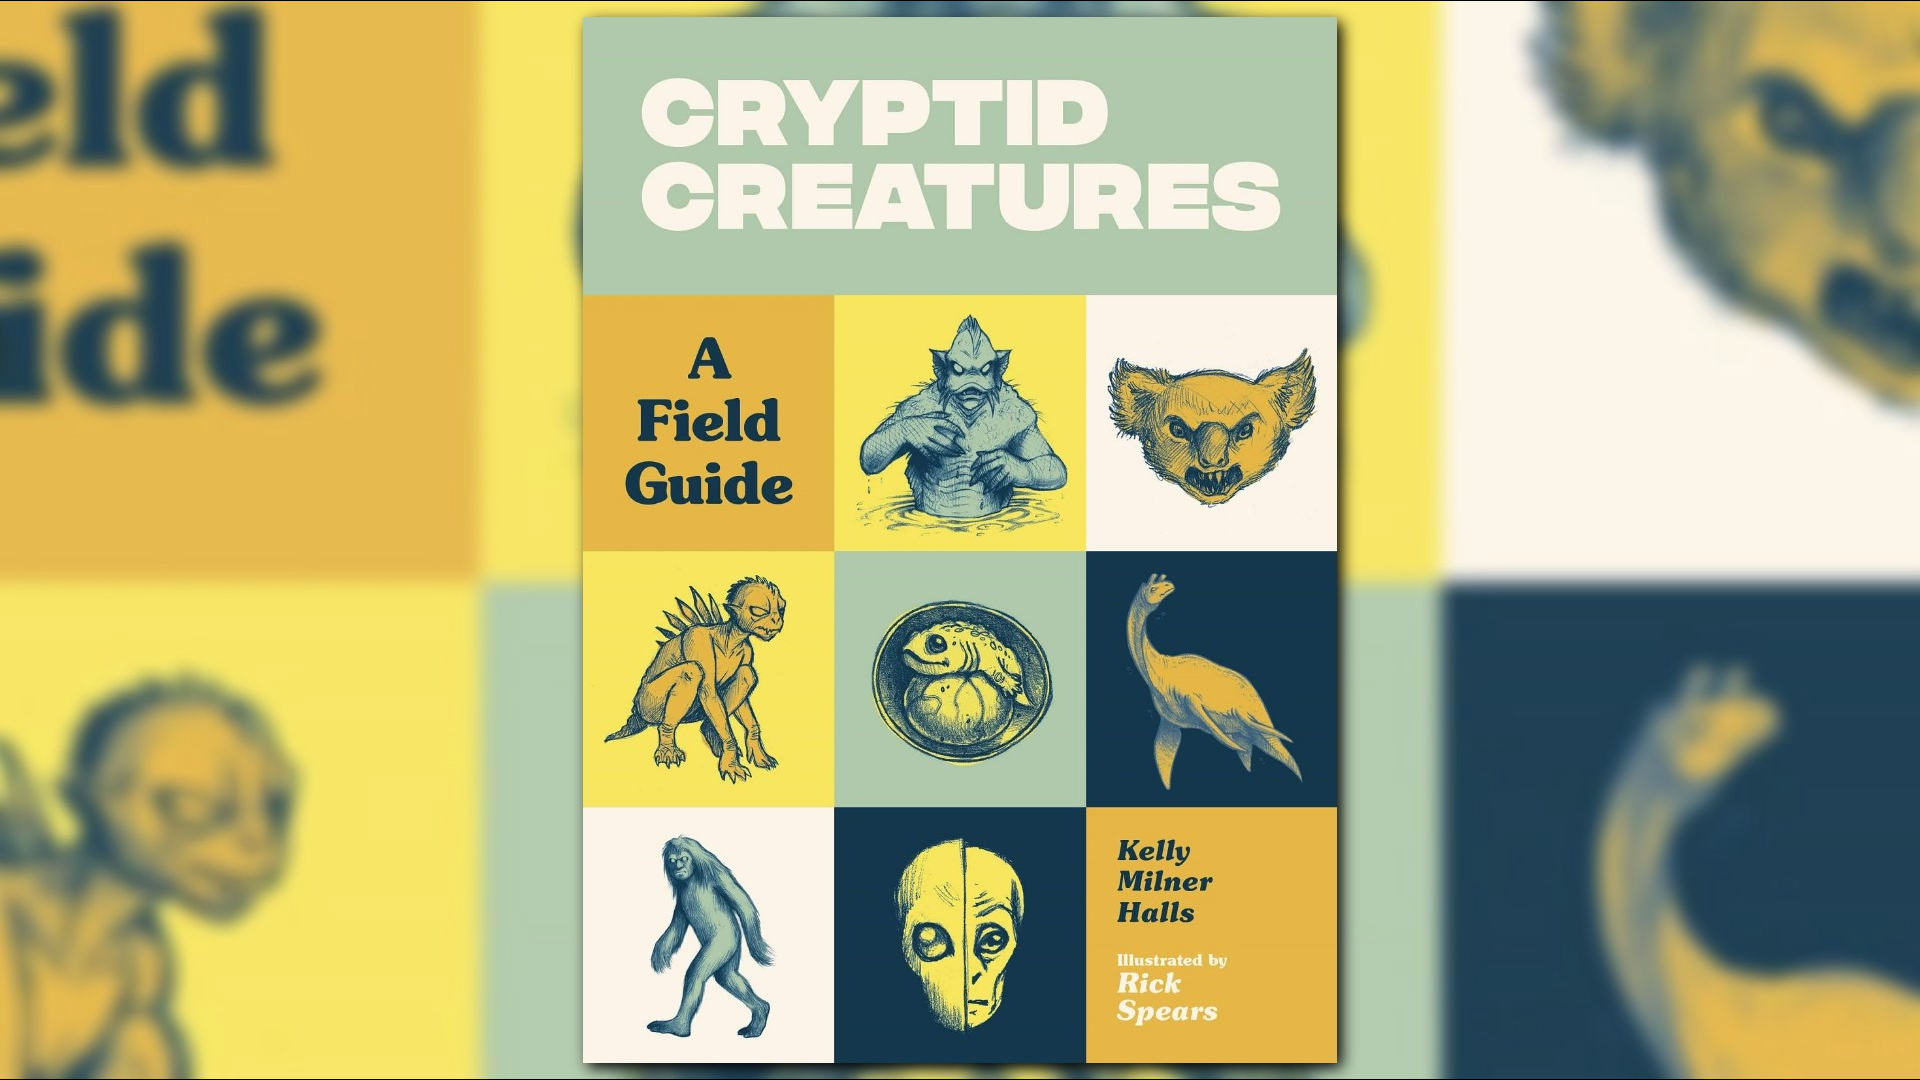 Spokane author Kelly Milner Halls introduces her fantastical guide to mysterious creatures.